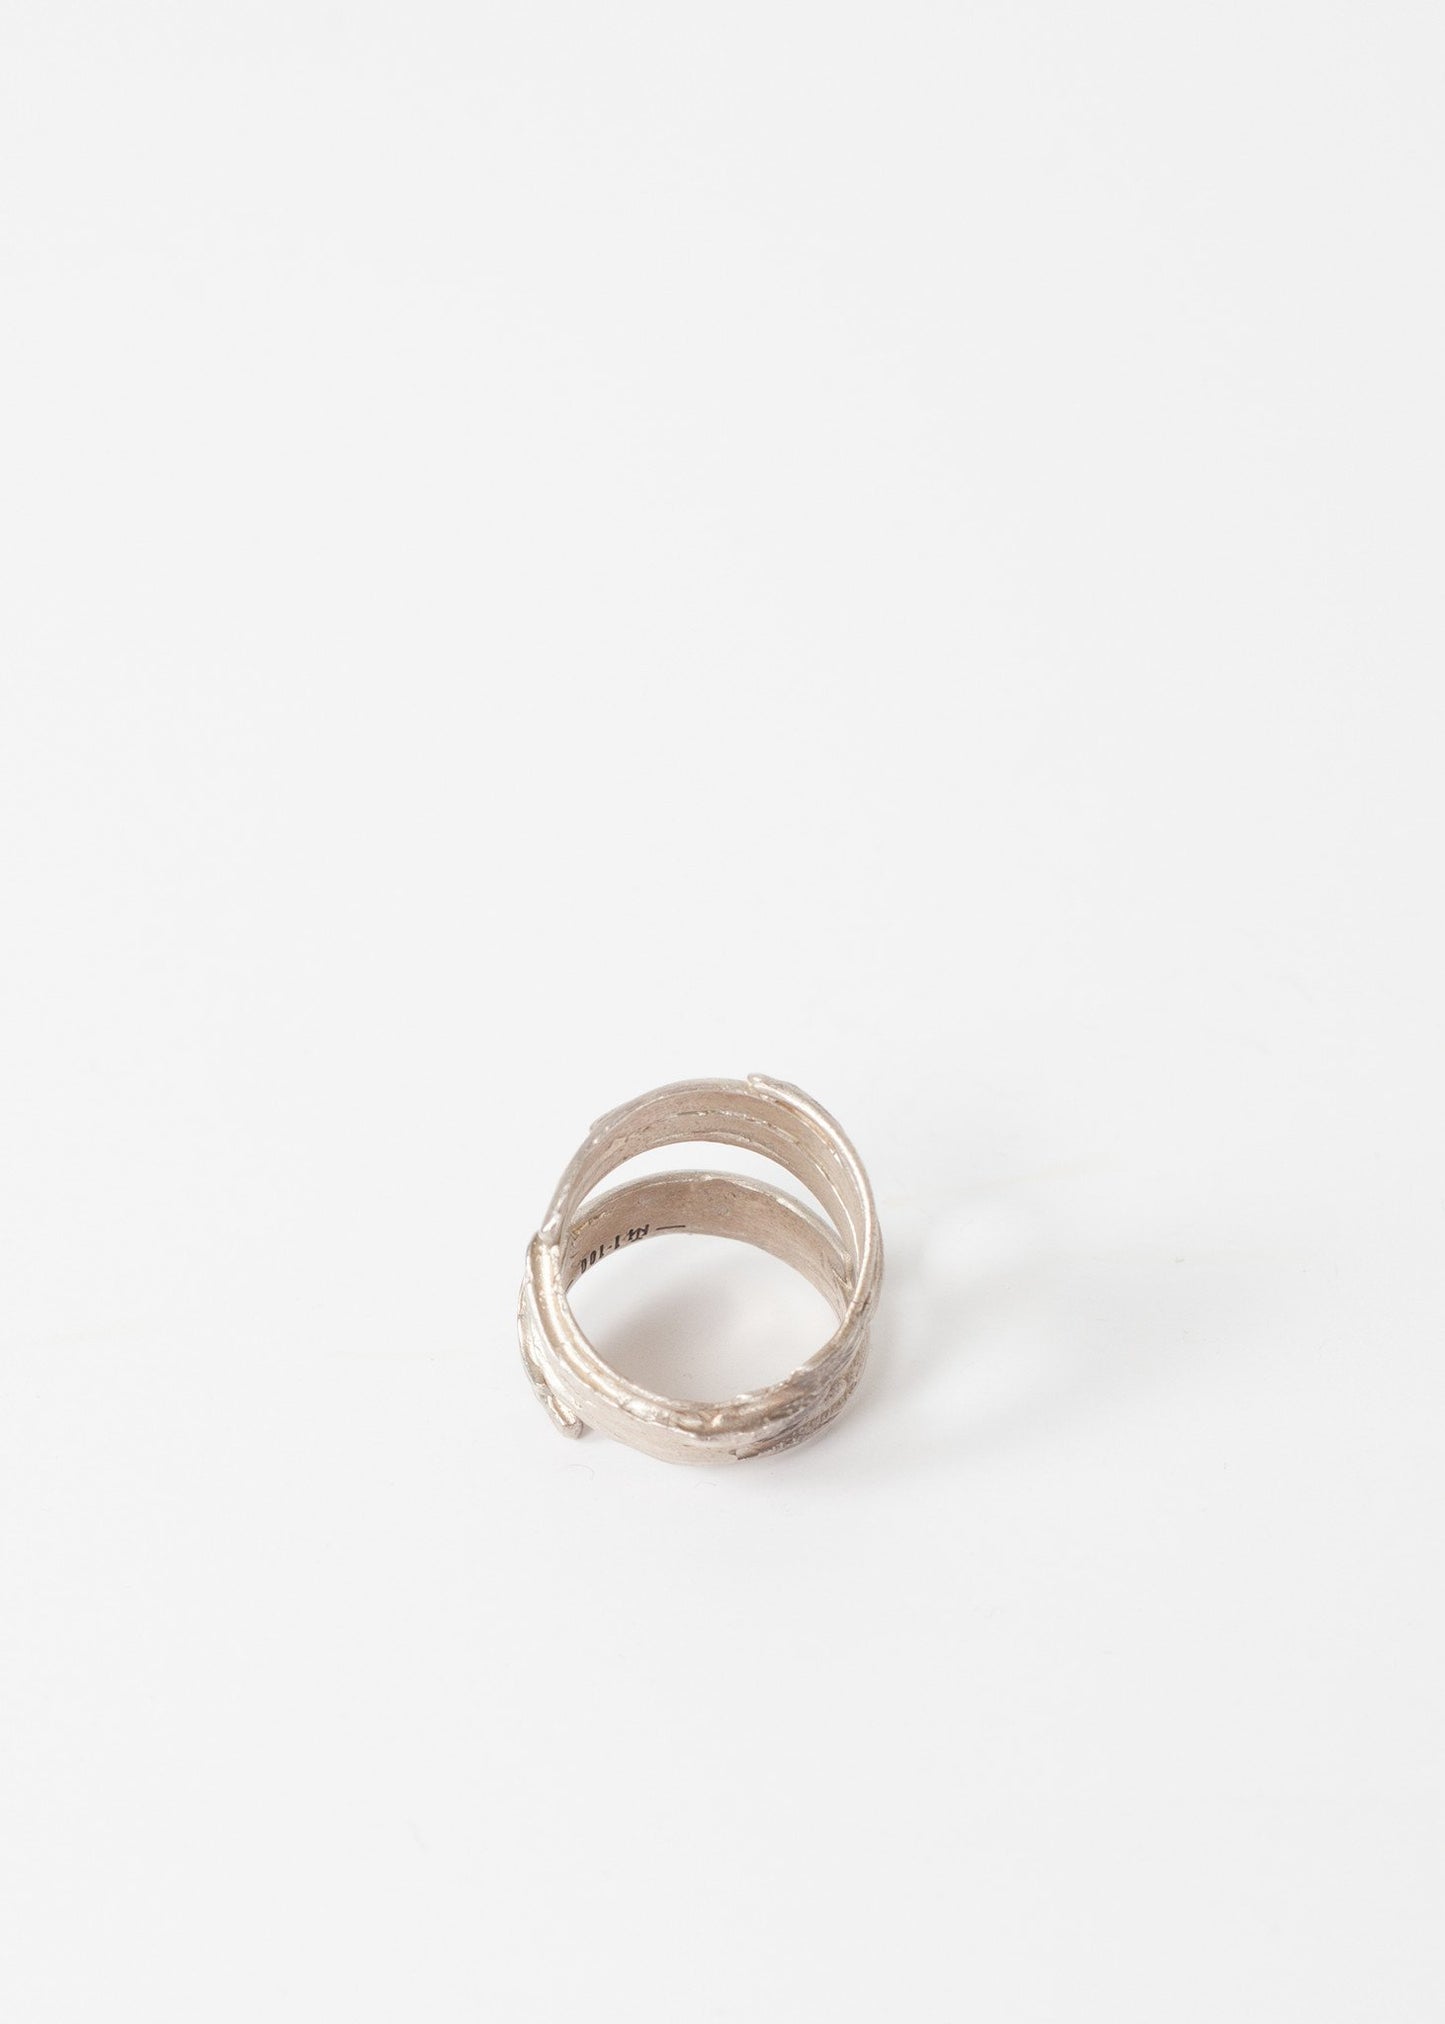 Silver Coil Ring in Sterling